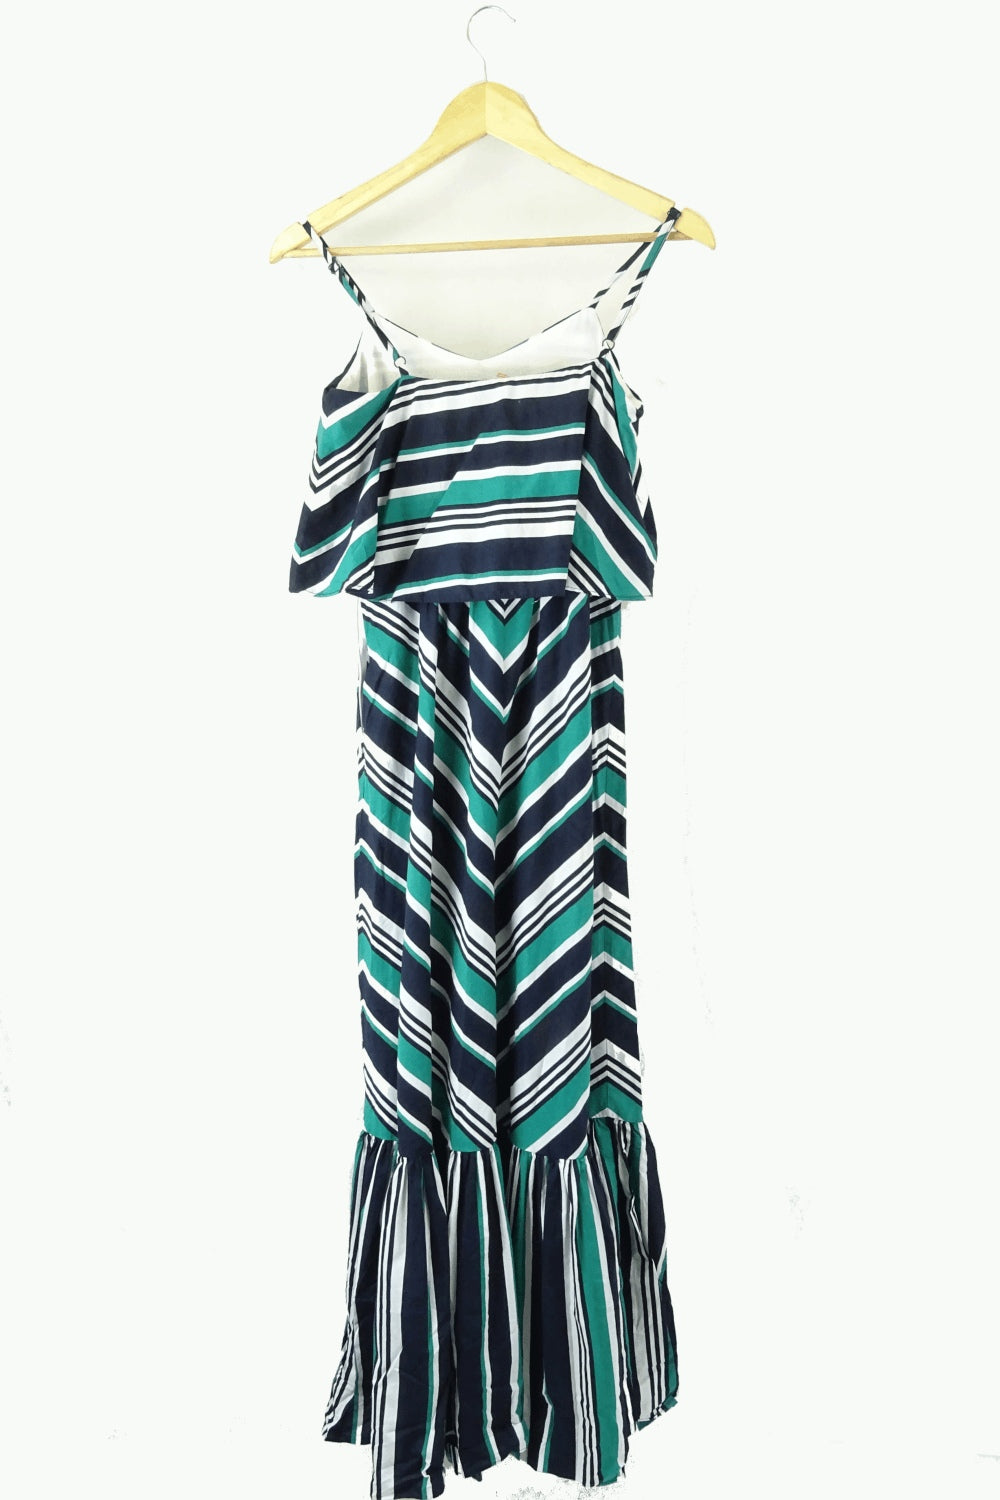 Piper Striped Green and Black Dress 6